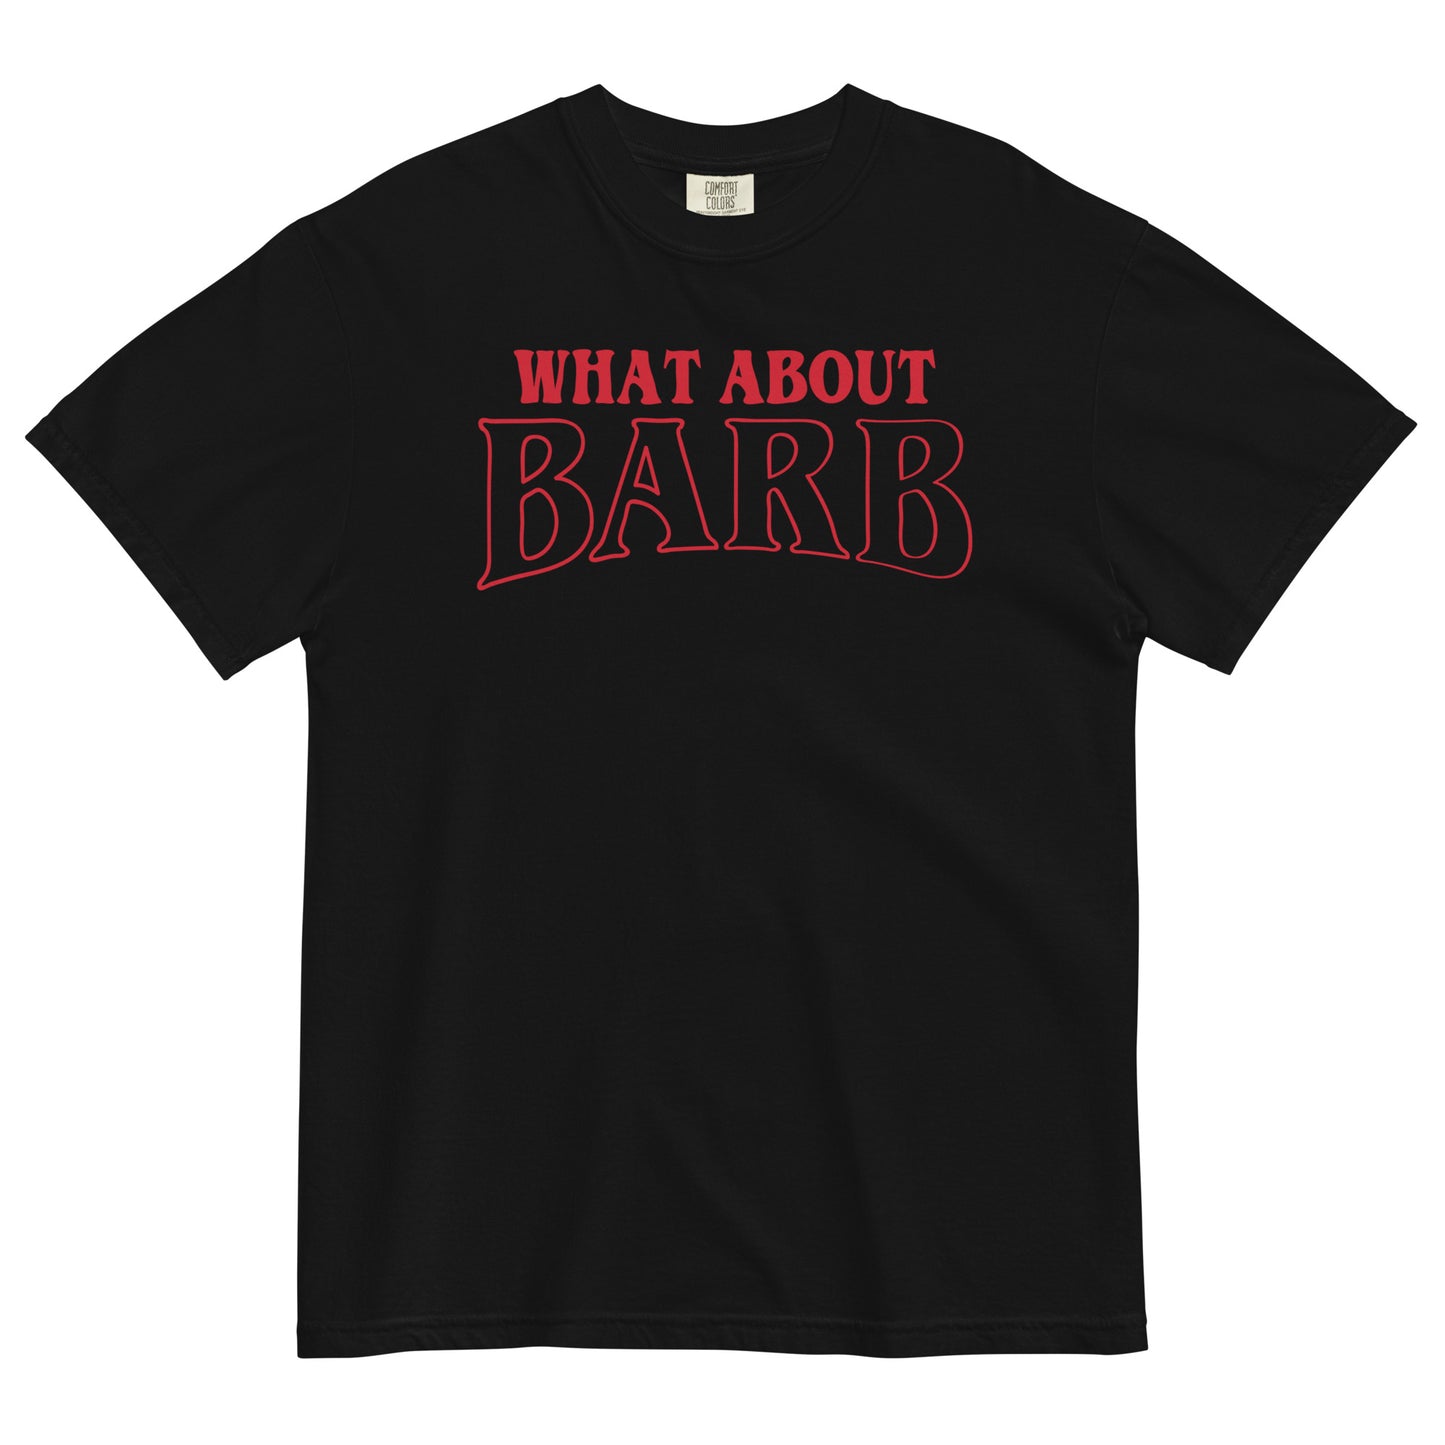 What About Barb? Men's Relaxed Fit Tee